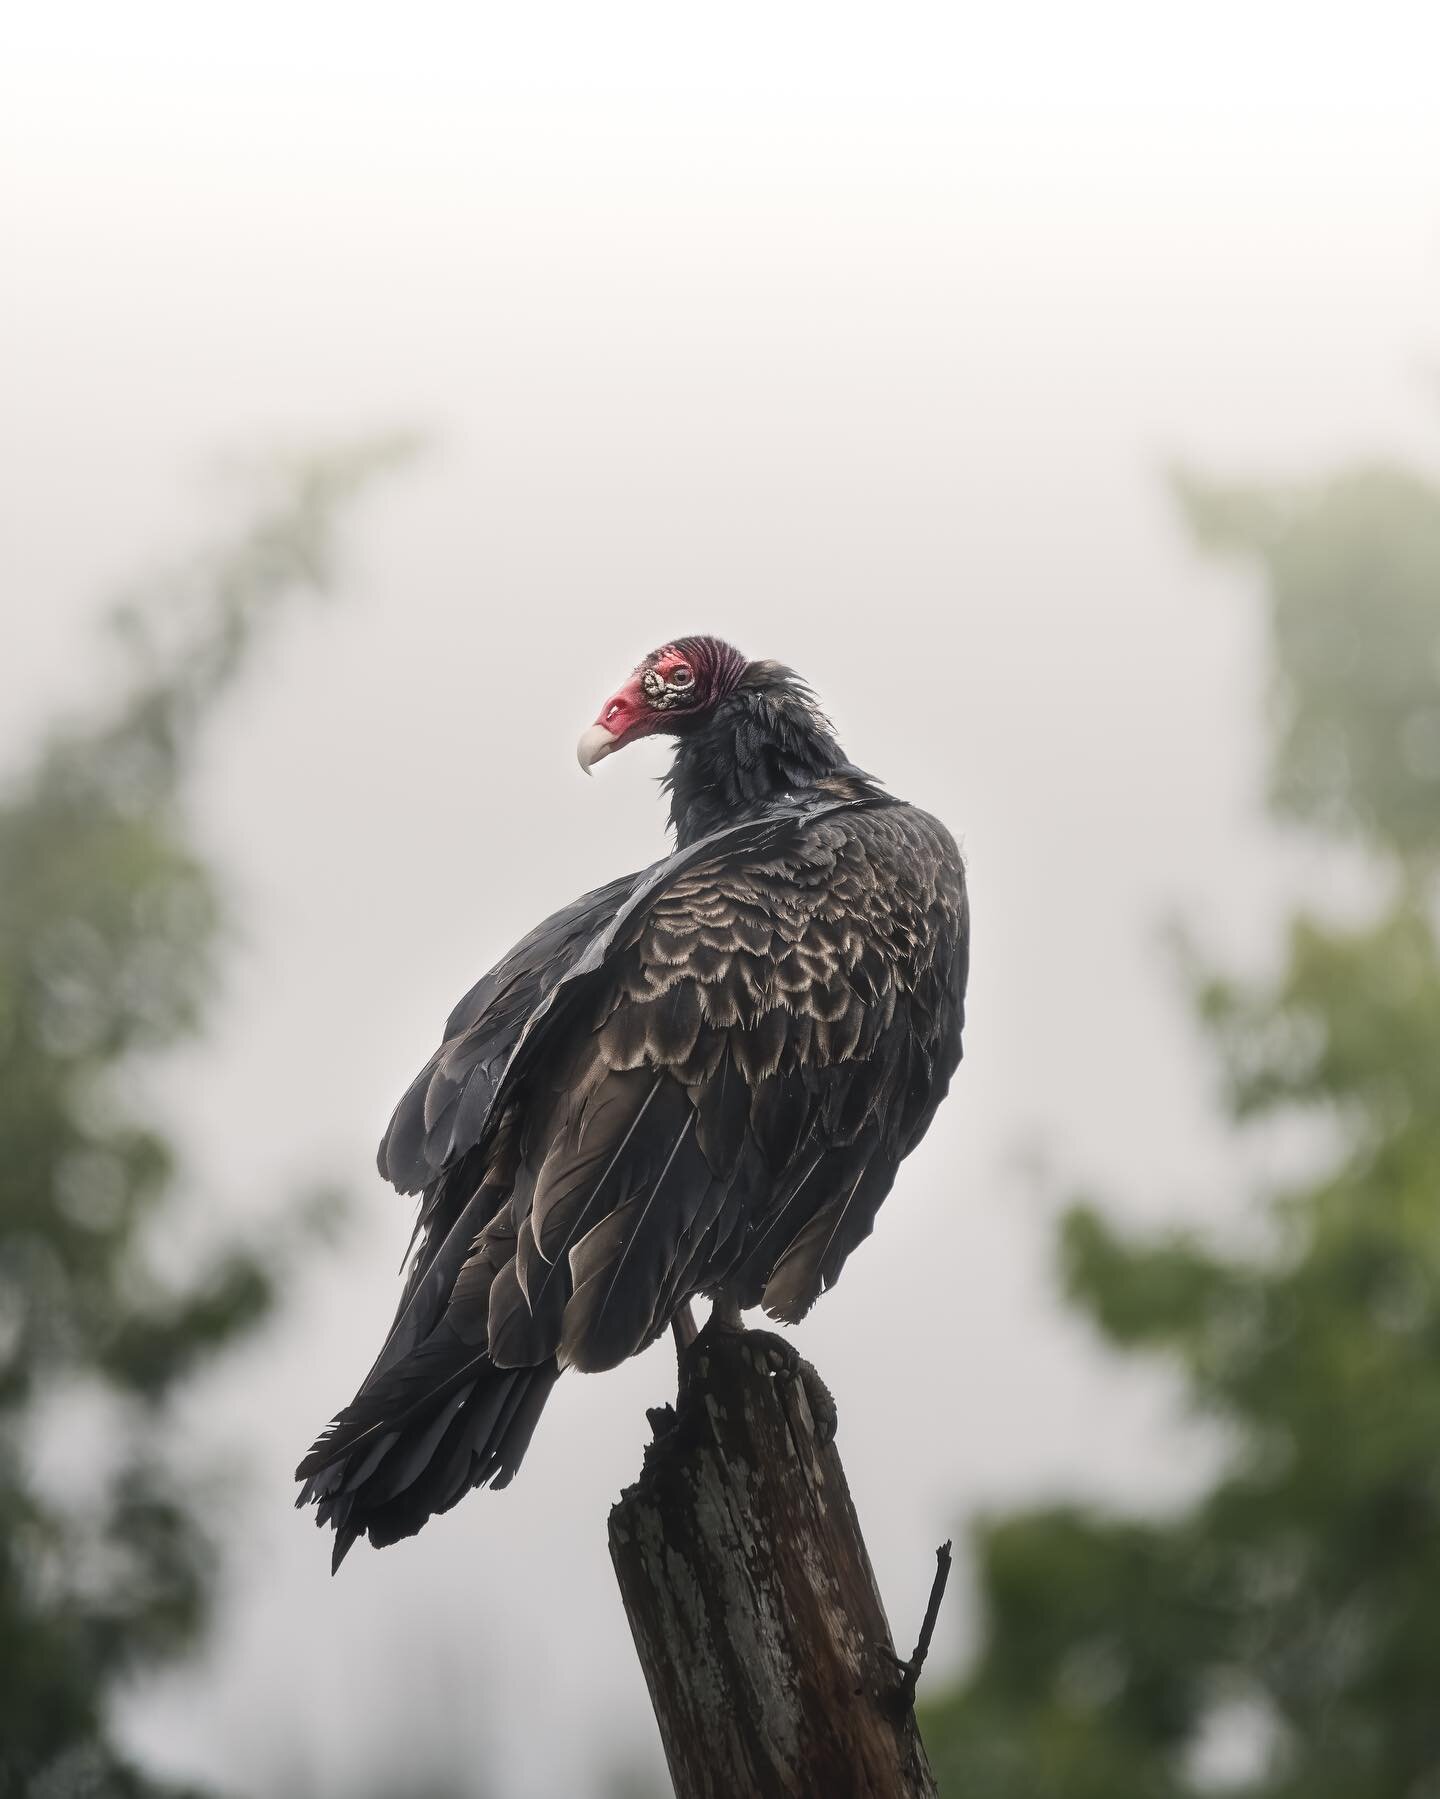 Lookin at this jive turkey (vulture), lookin back at it.  Have a great holiday weekend everyone !